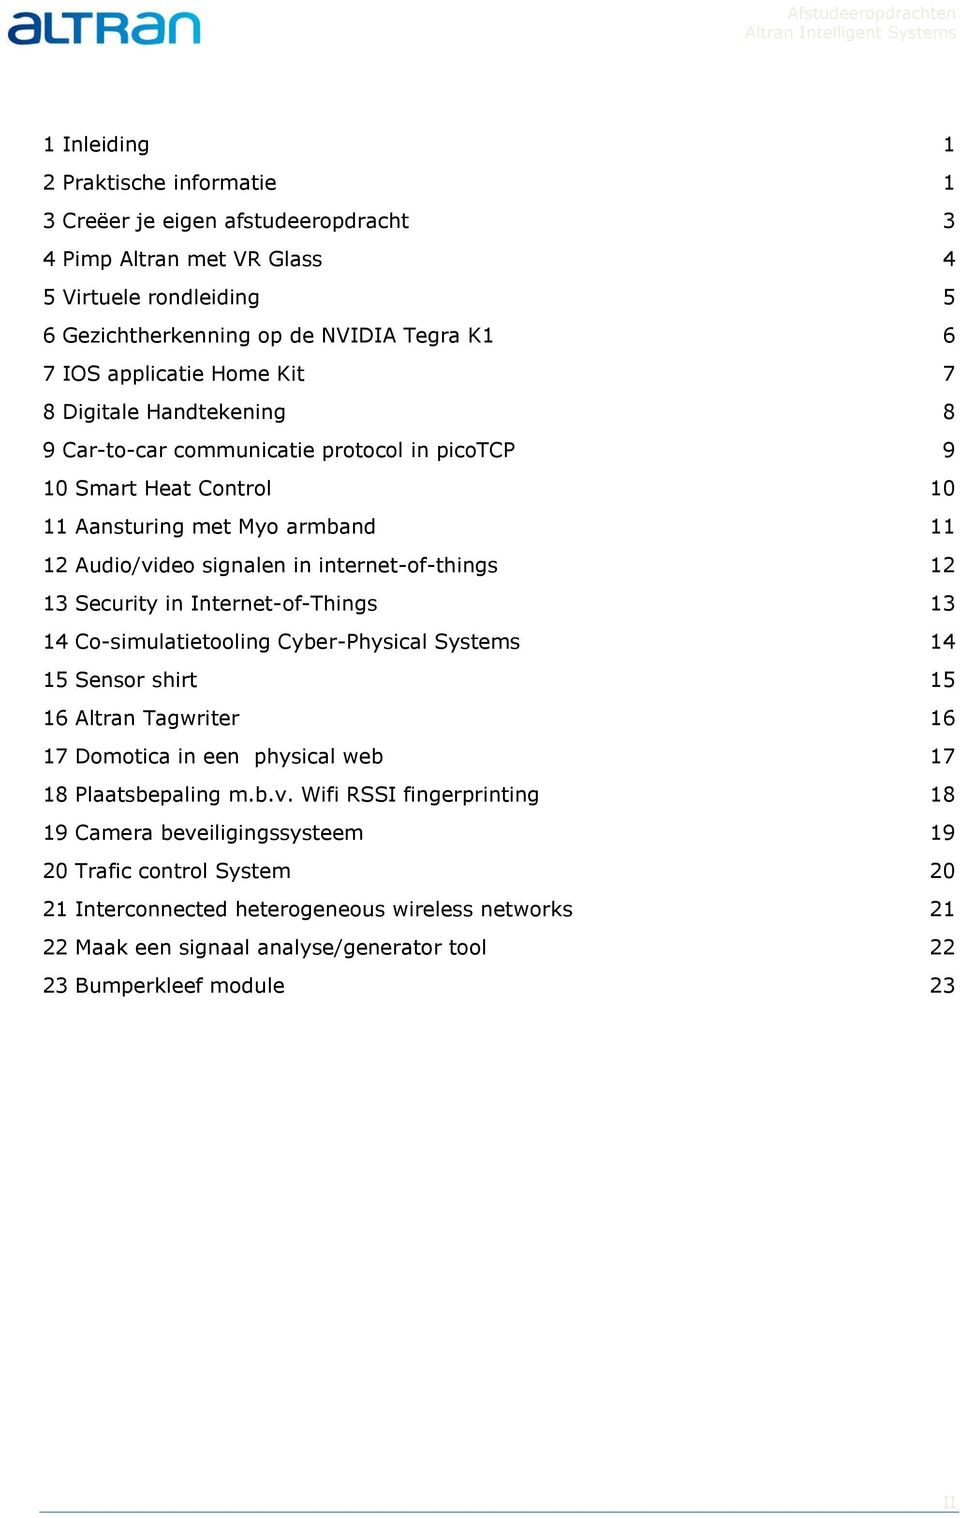 Security in Internet-of-Things 13 14 Co-simulatietooling Cyber-Physical Systems 14 15 Sensor shirt 15 16 Altran Tagwriter 16 17 Domotica in een physical web 17 18 Plaatsbepaling m.b.v.